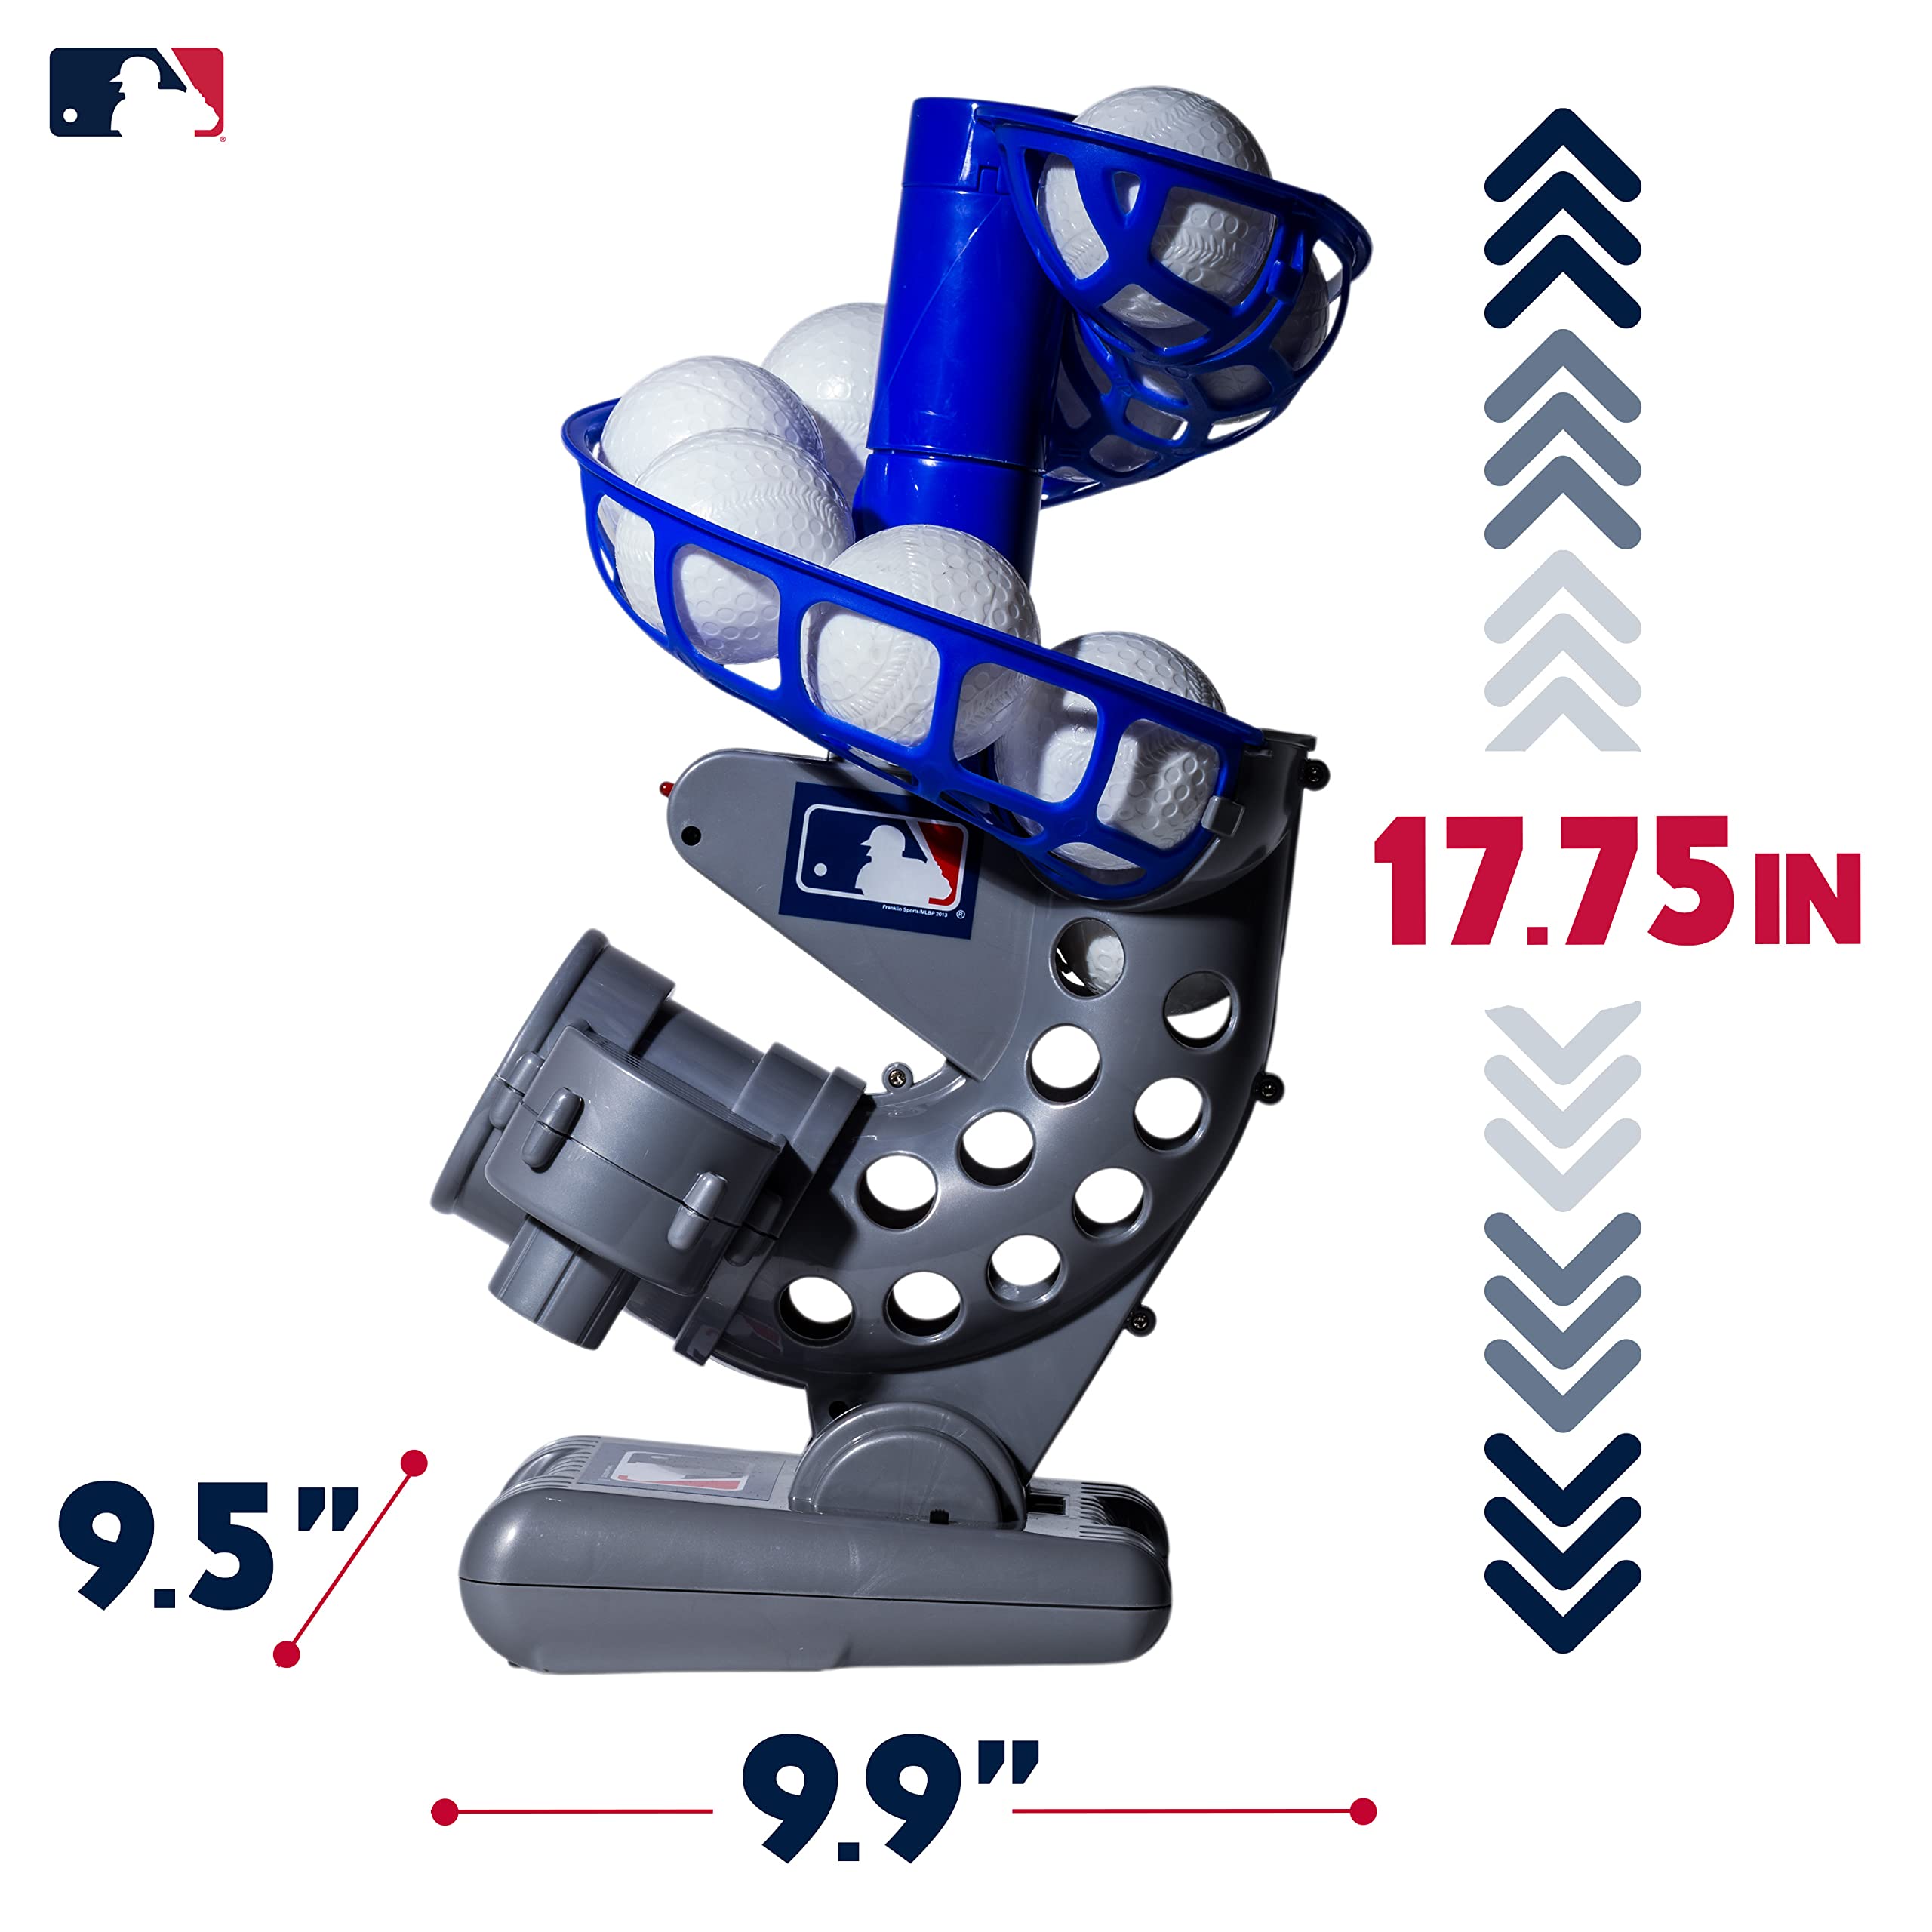 Franklin Sports MLB Kids Electronic Baseball Pitching Machine - Automatic Youth Pitching Machine with (6) Plastic Baseballs Included -Youth Baseball Pitcher for Kids Ages 3+